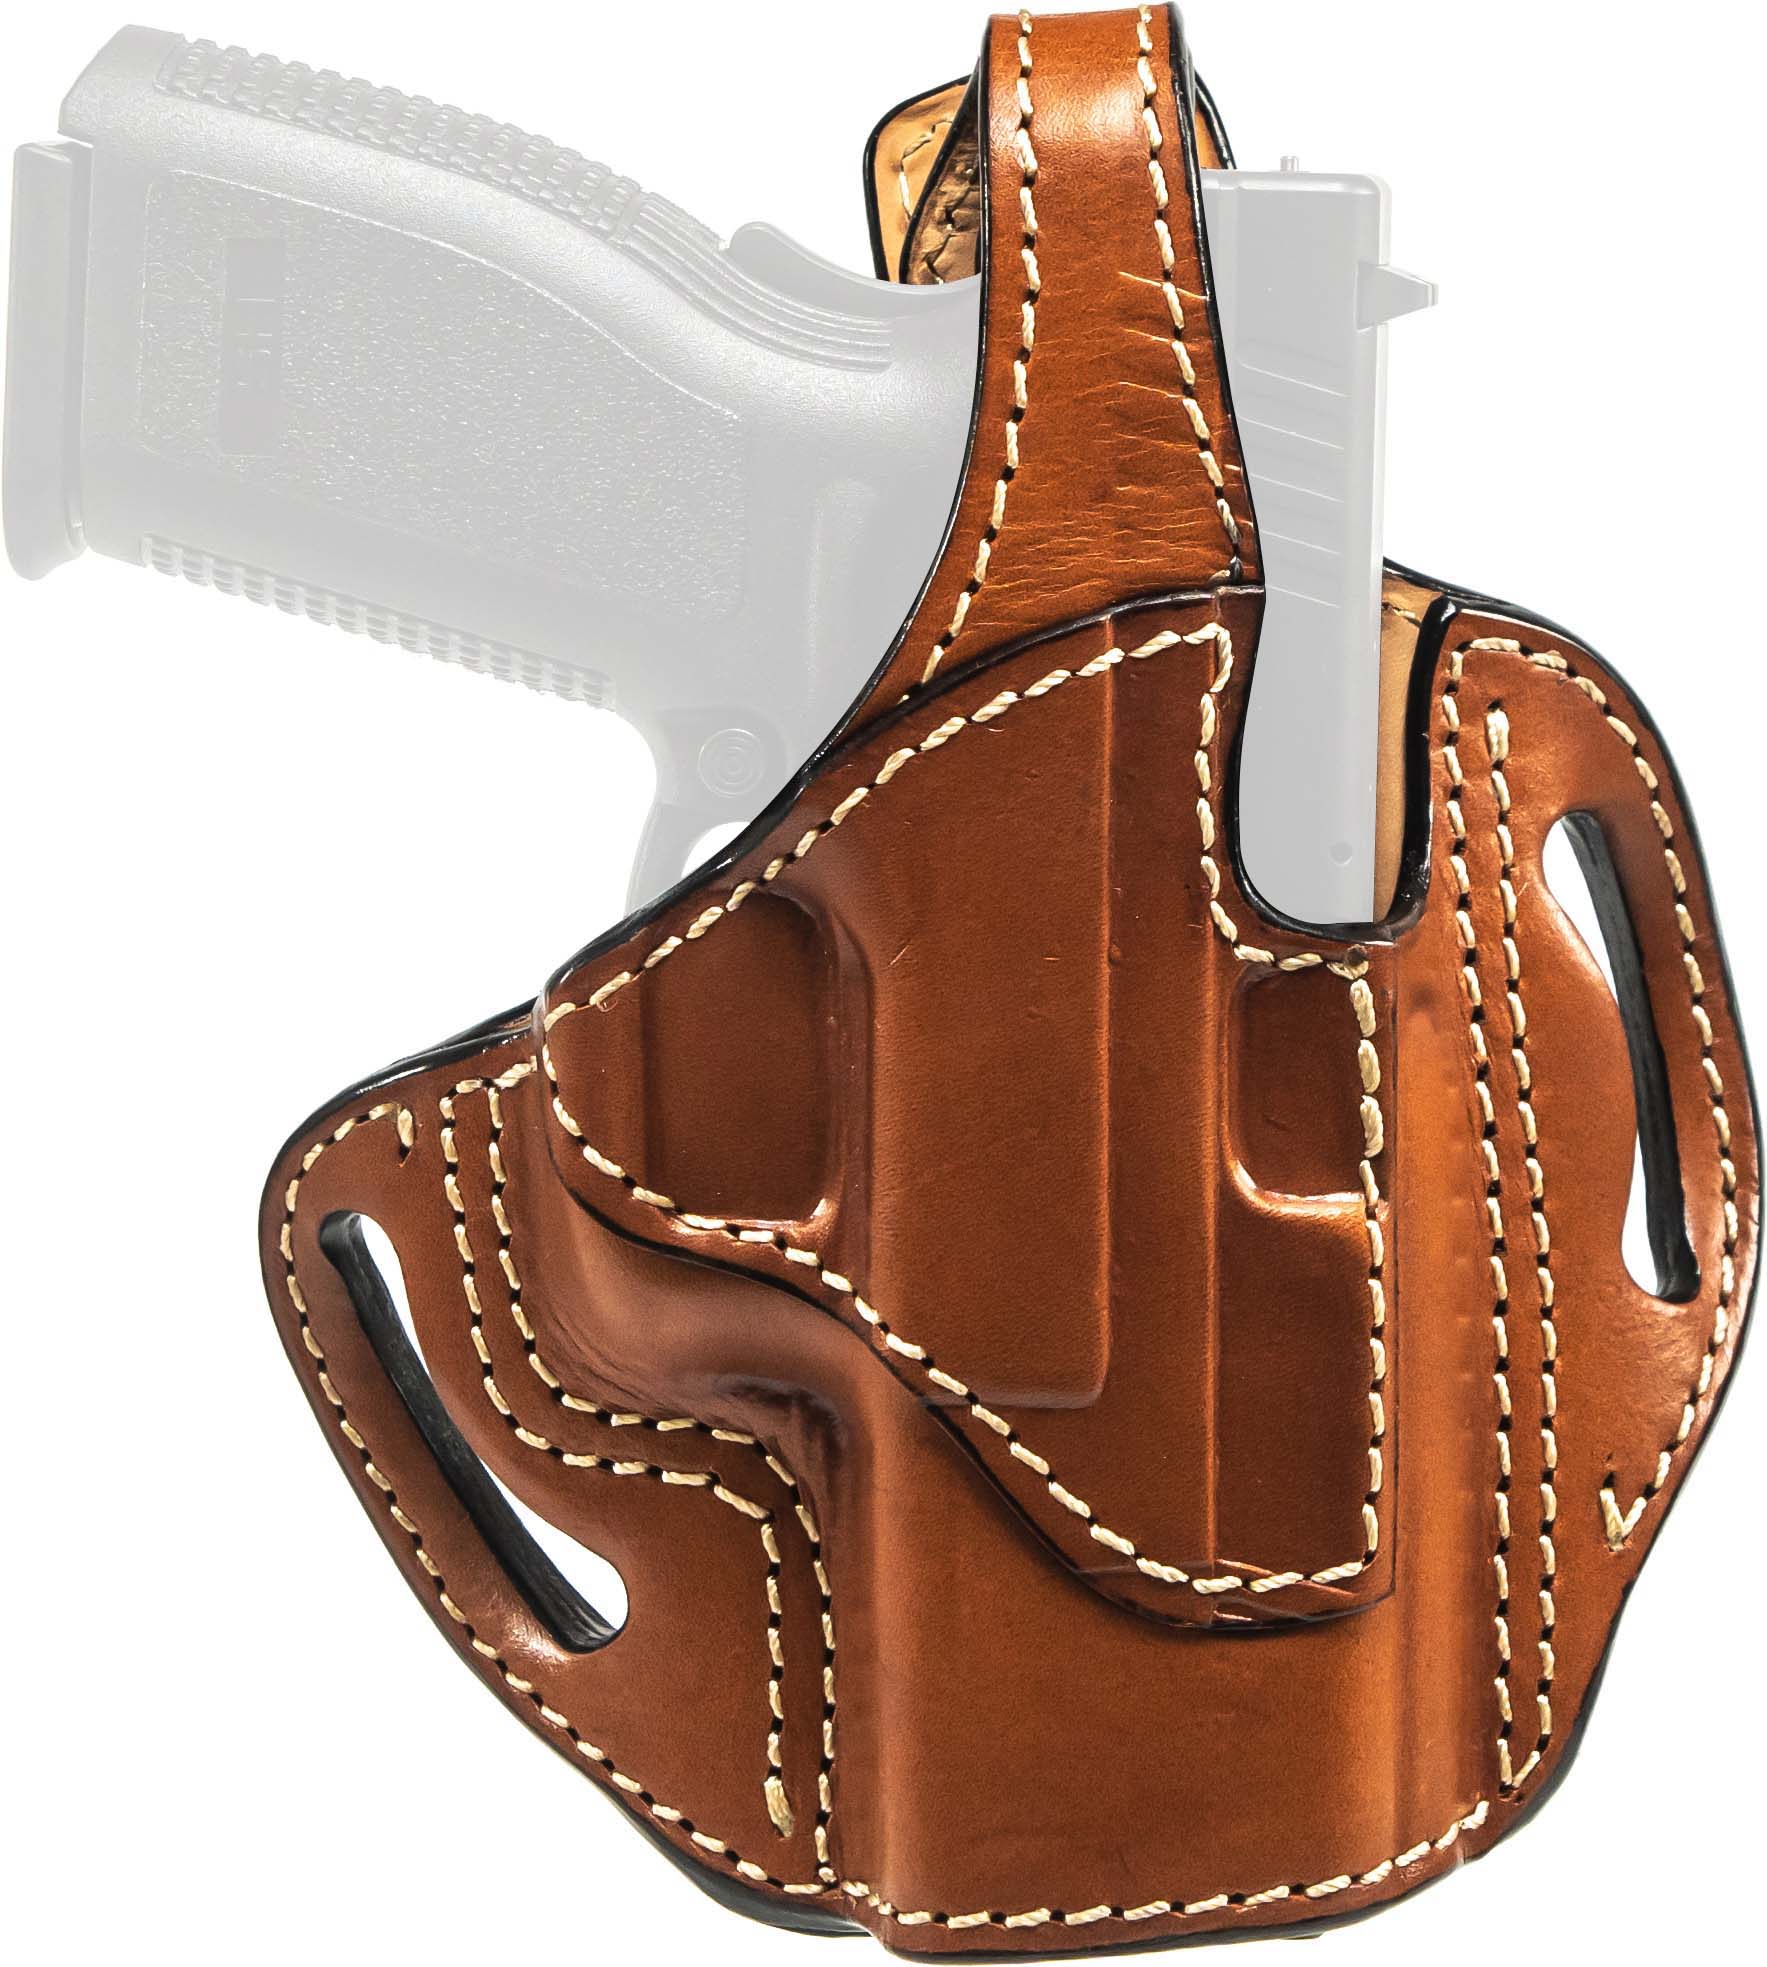 Tagua Gunleather Canyon Elite OWB Leather Holster